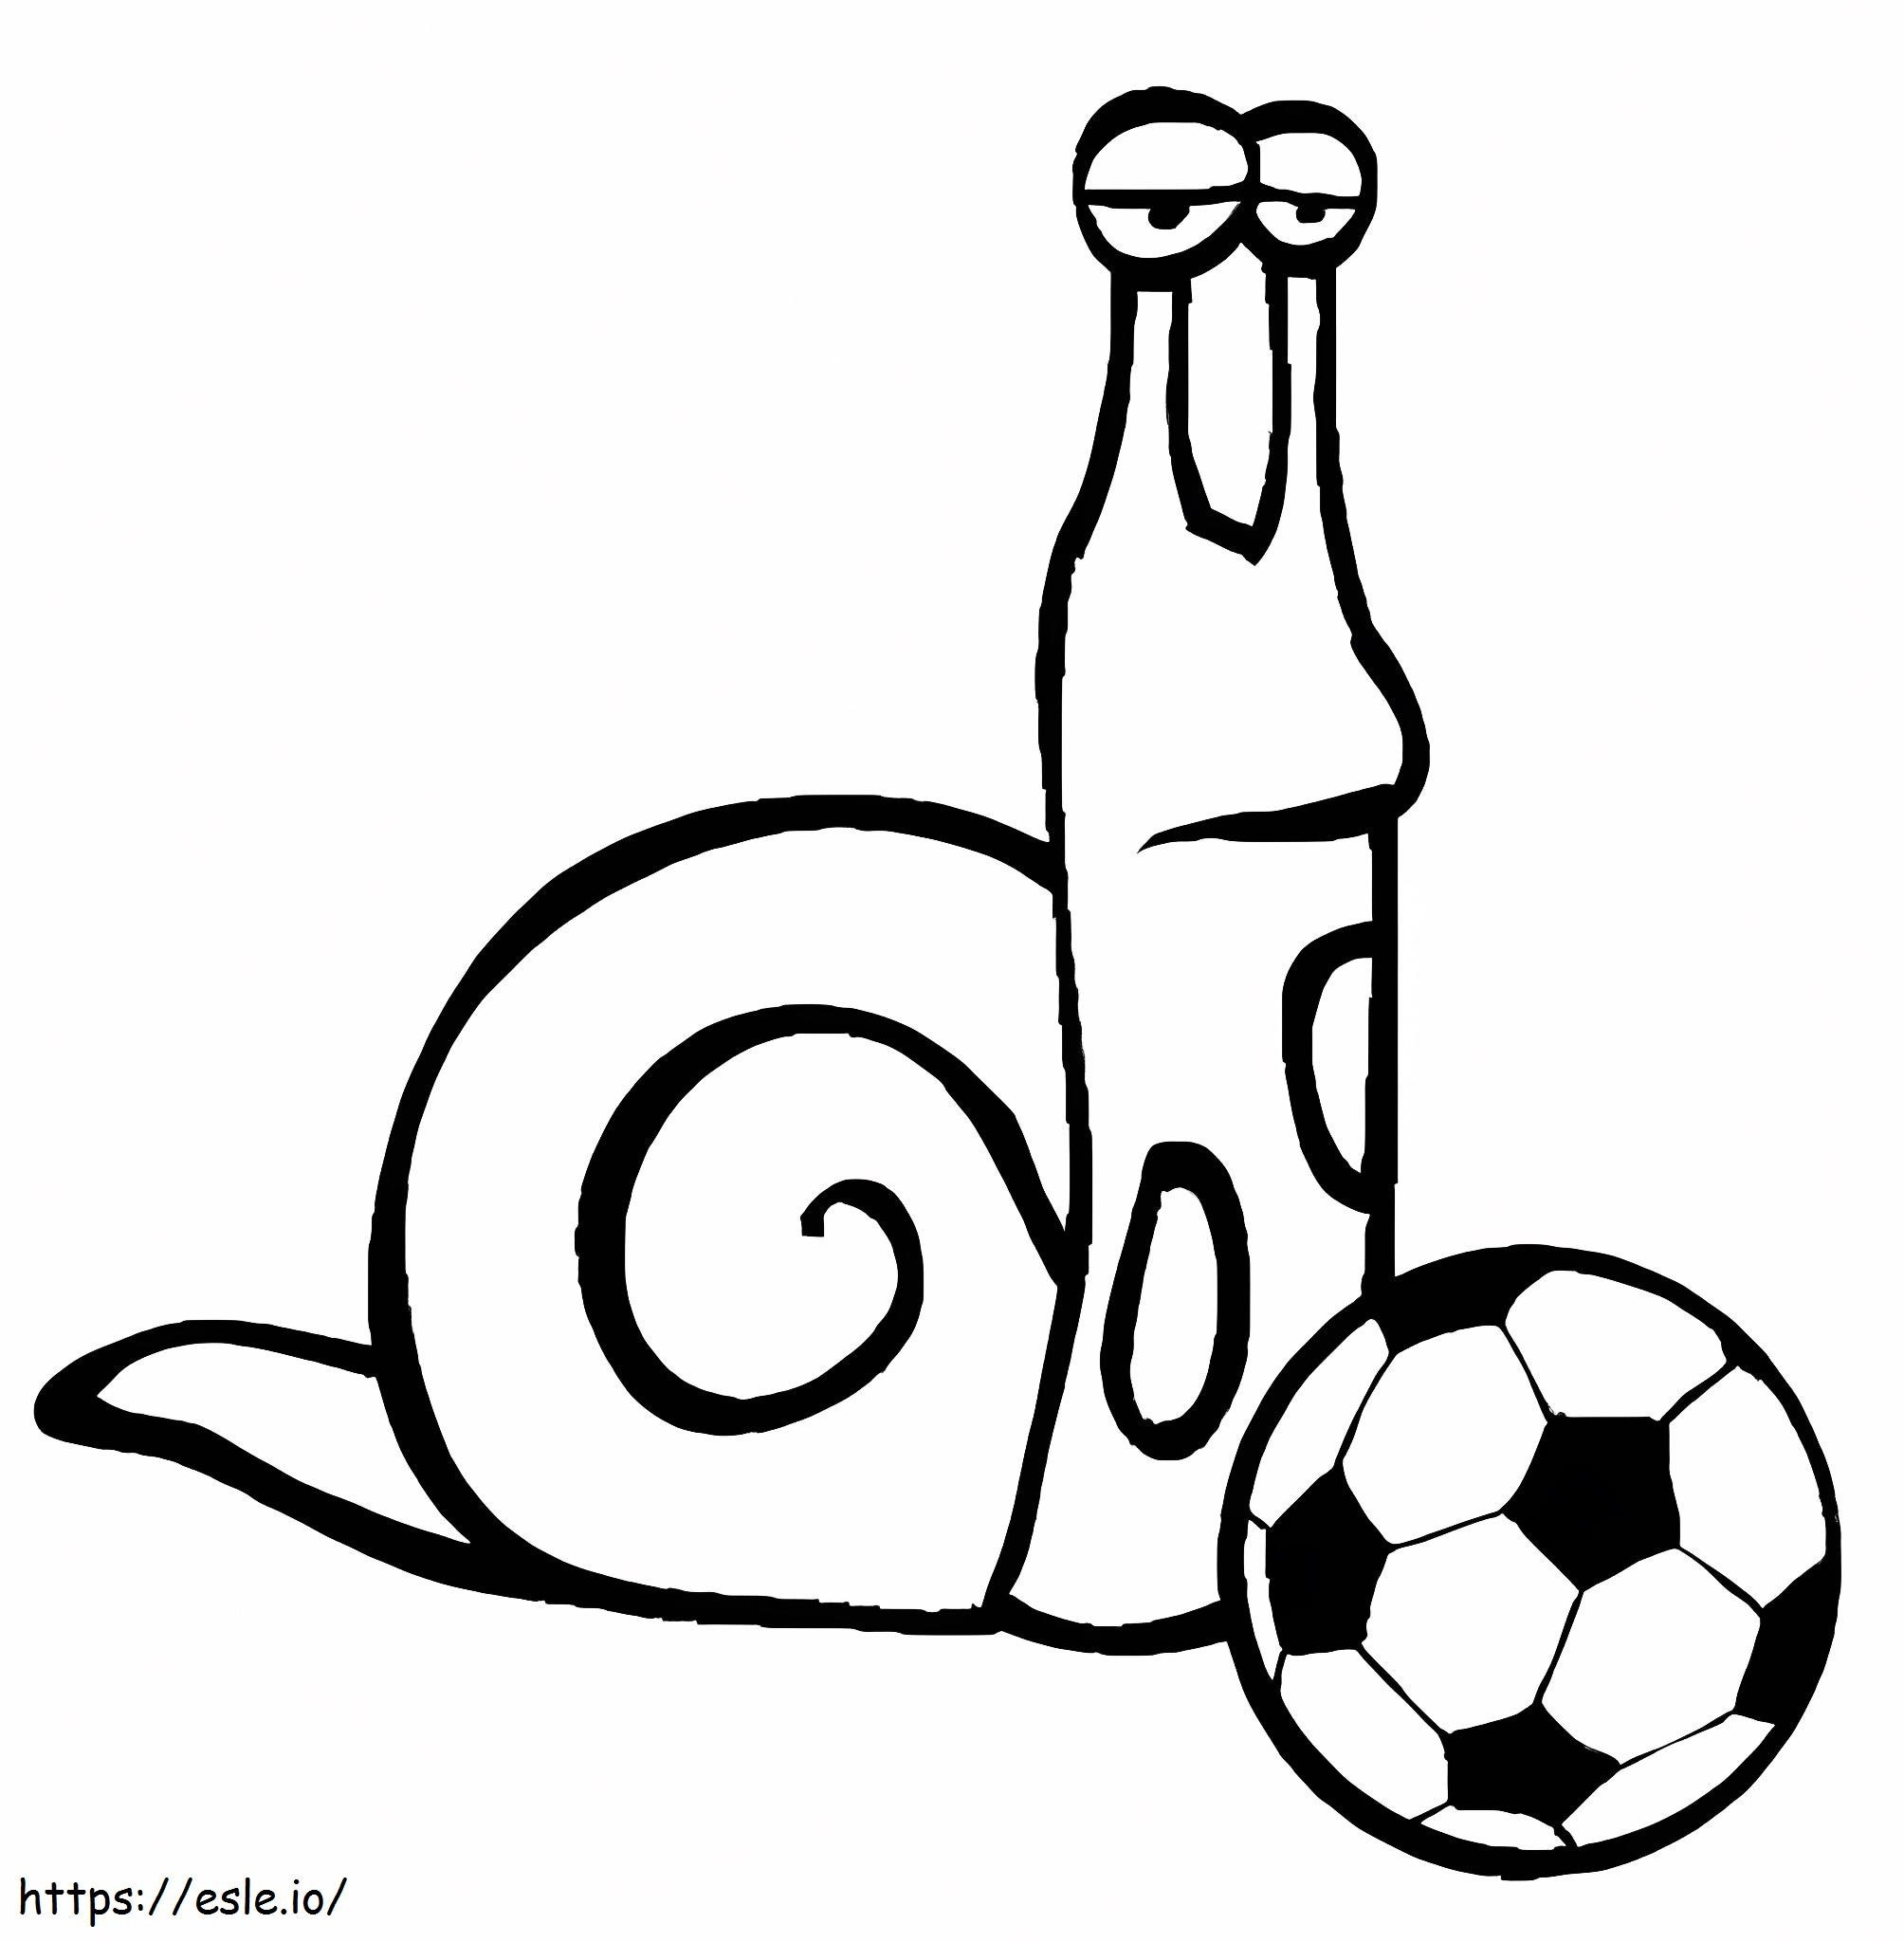 Snail Playing Soccer coloring page